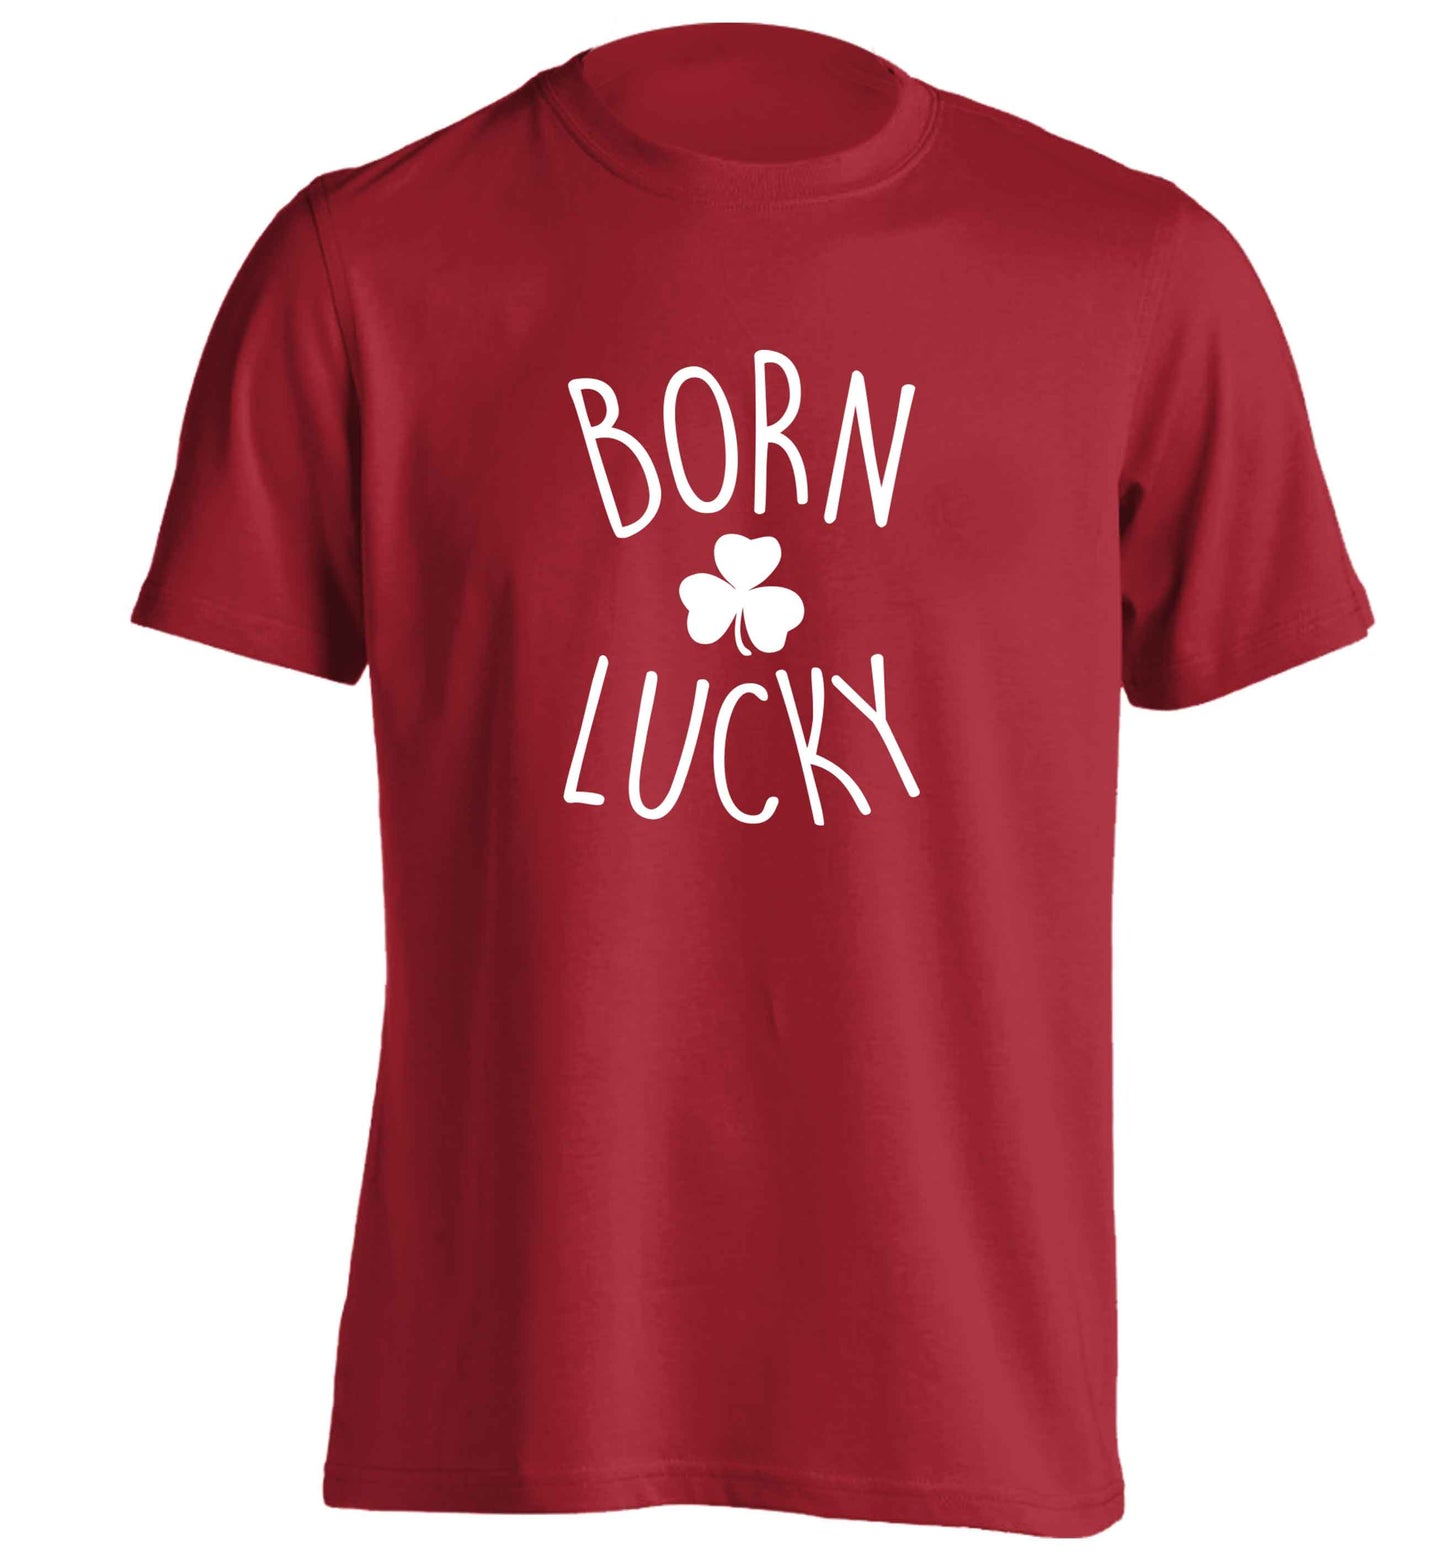 Born Lucky adults unisex red Tshirt 2XL